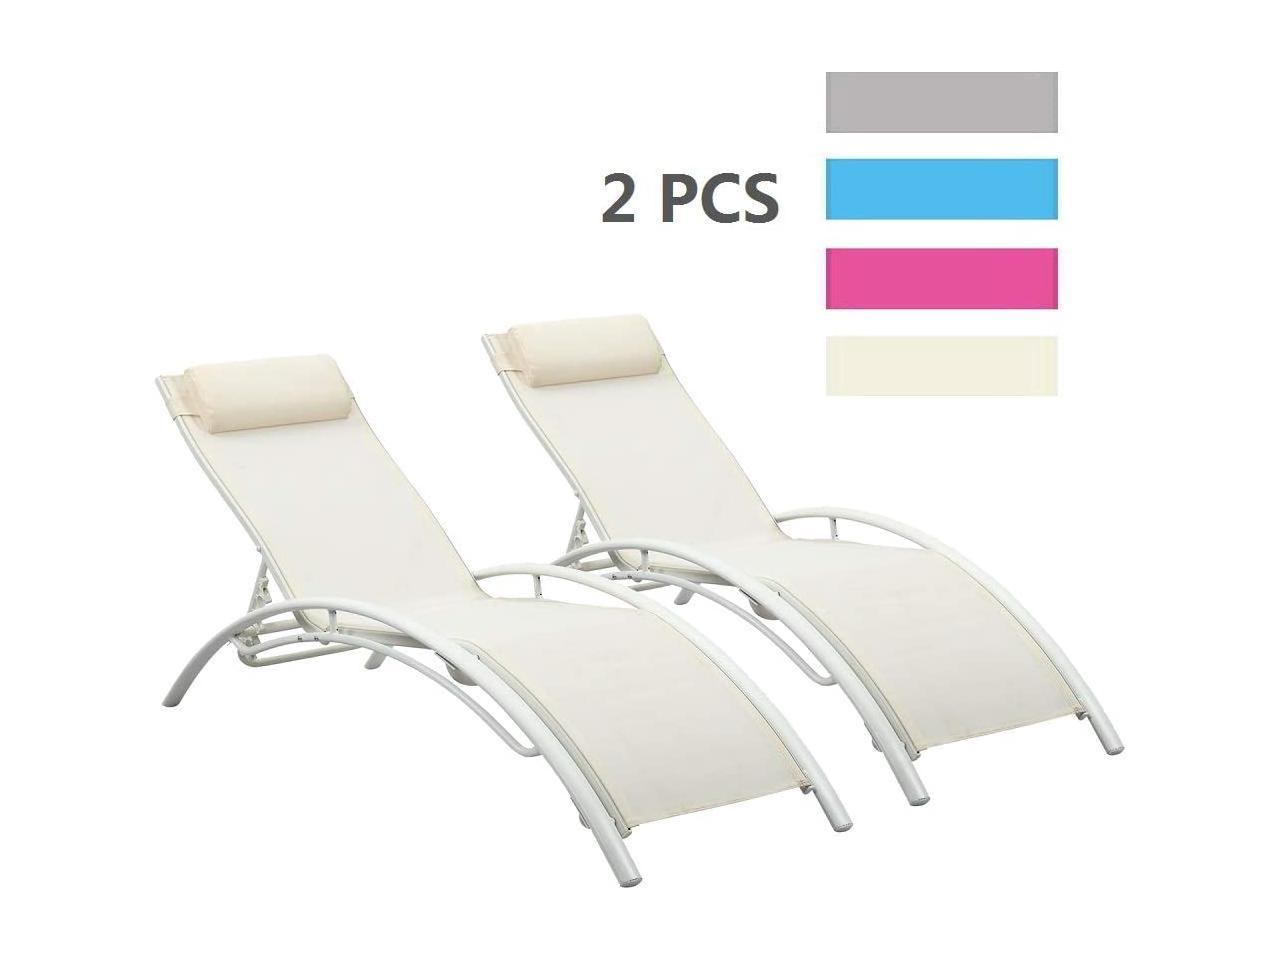 Saemoza Outdoor Patio Chaise Lounge Chairs 2 Set Blcak Backyard Adjustable 5 Gears Reclining Folding Portable Lounge Chair with Headrest for Beach Yard 